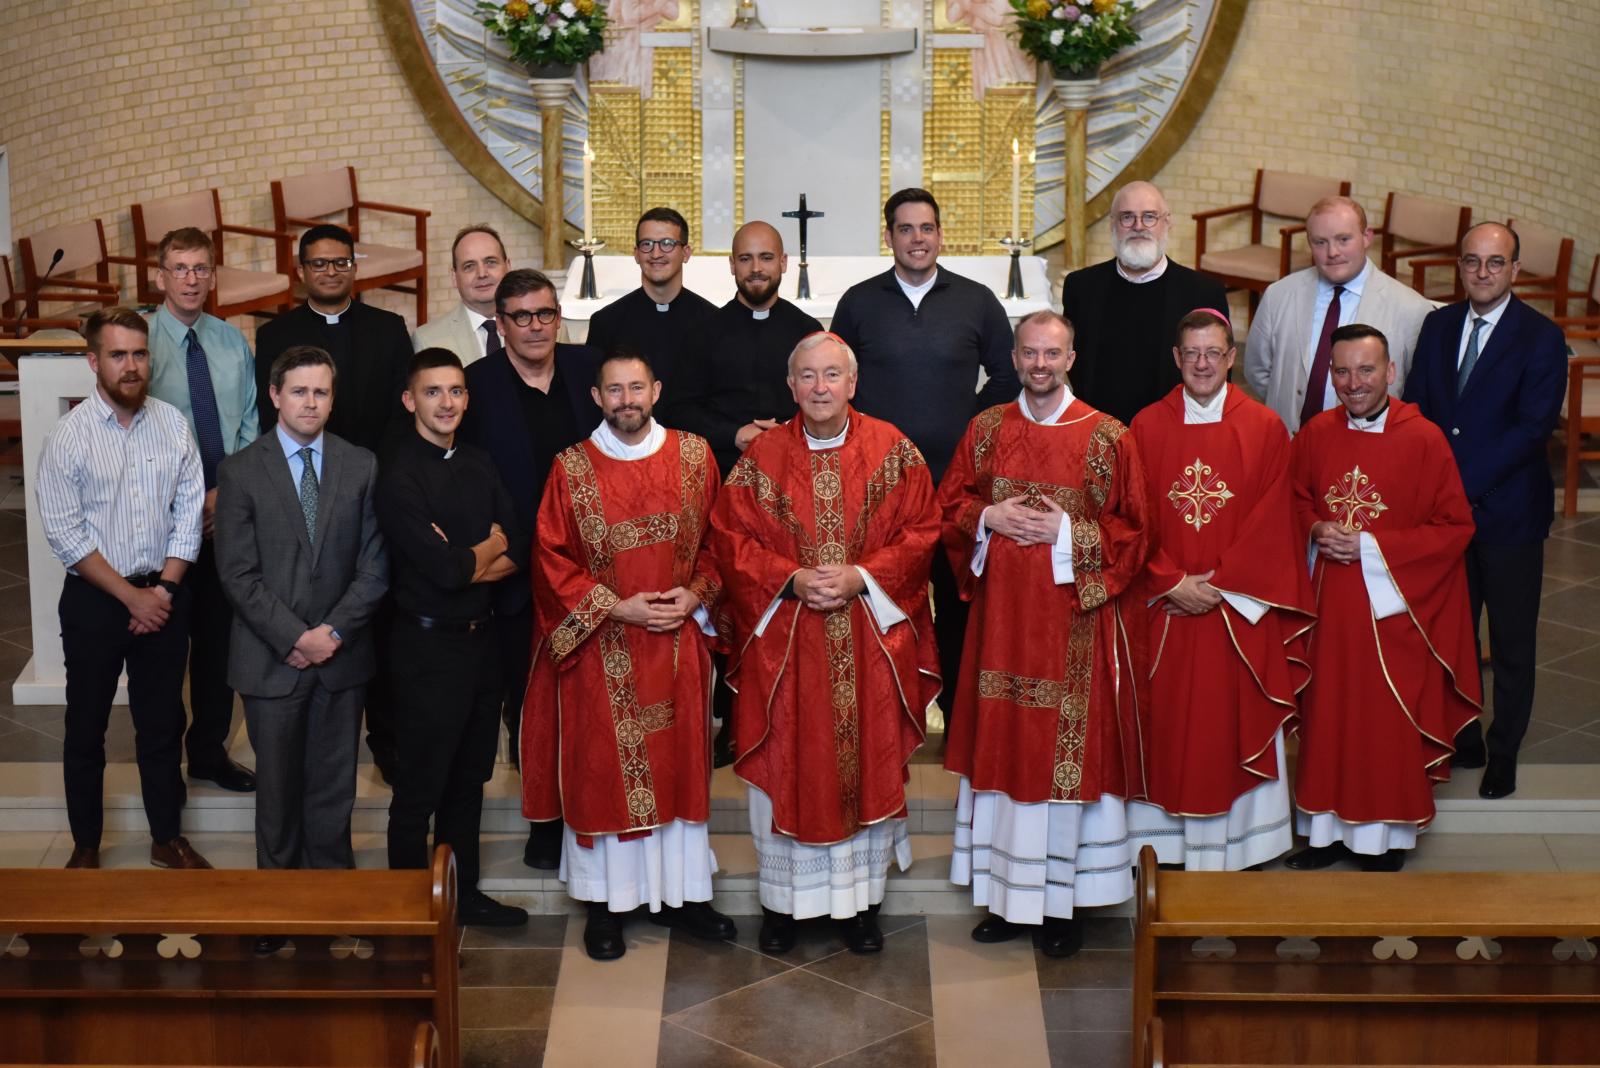 Westminster seminarians mark the start of the new academic year - Diocese of Westminster